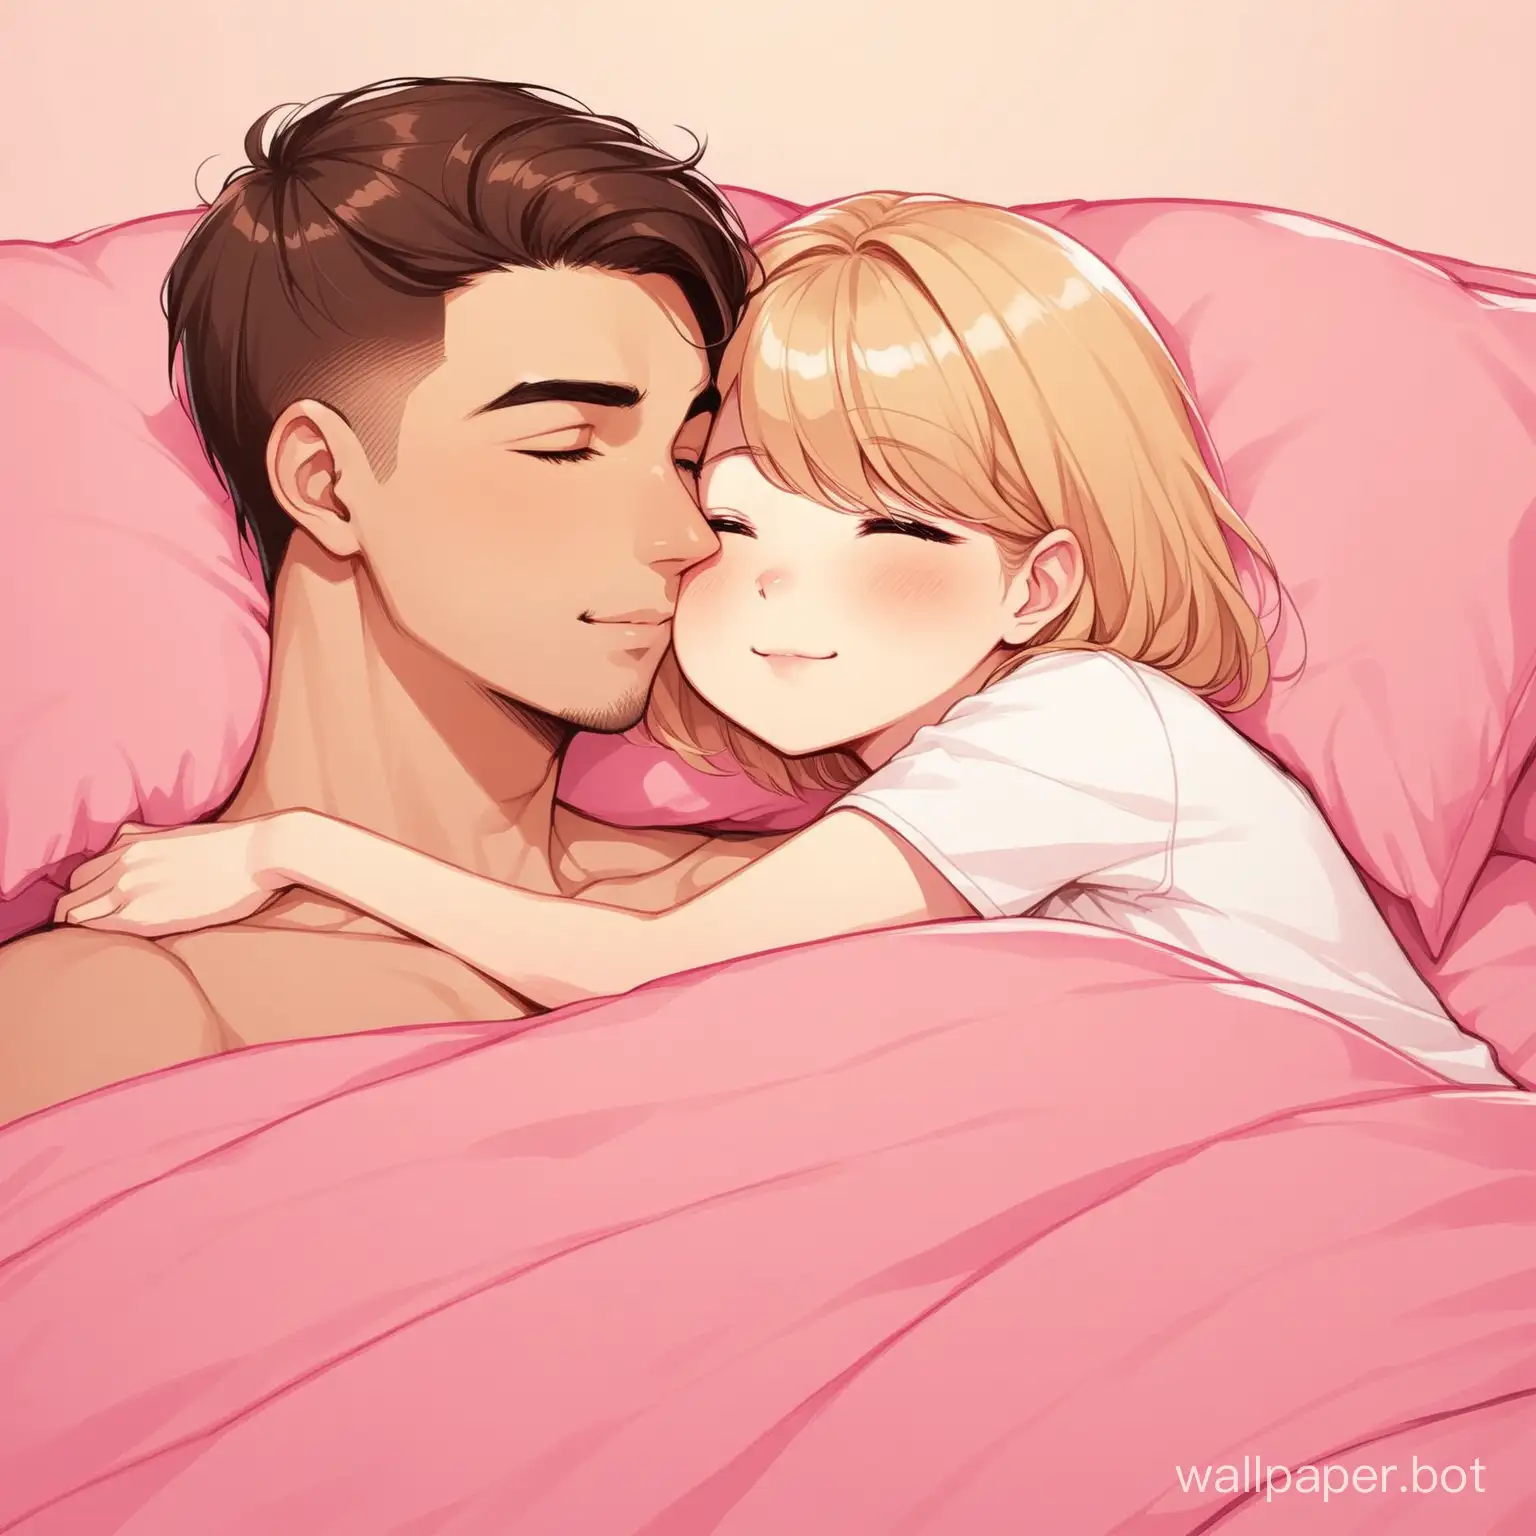 Romantic-Snuggle-in-Pink-Bed-Sweet-Moment-Between-Blondish-Brownish-Haired-Girl-and-Mexican-Man